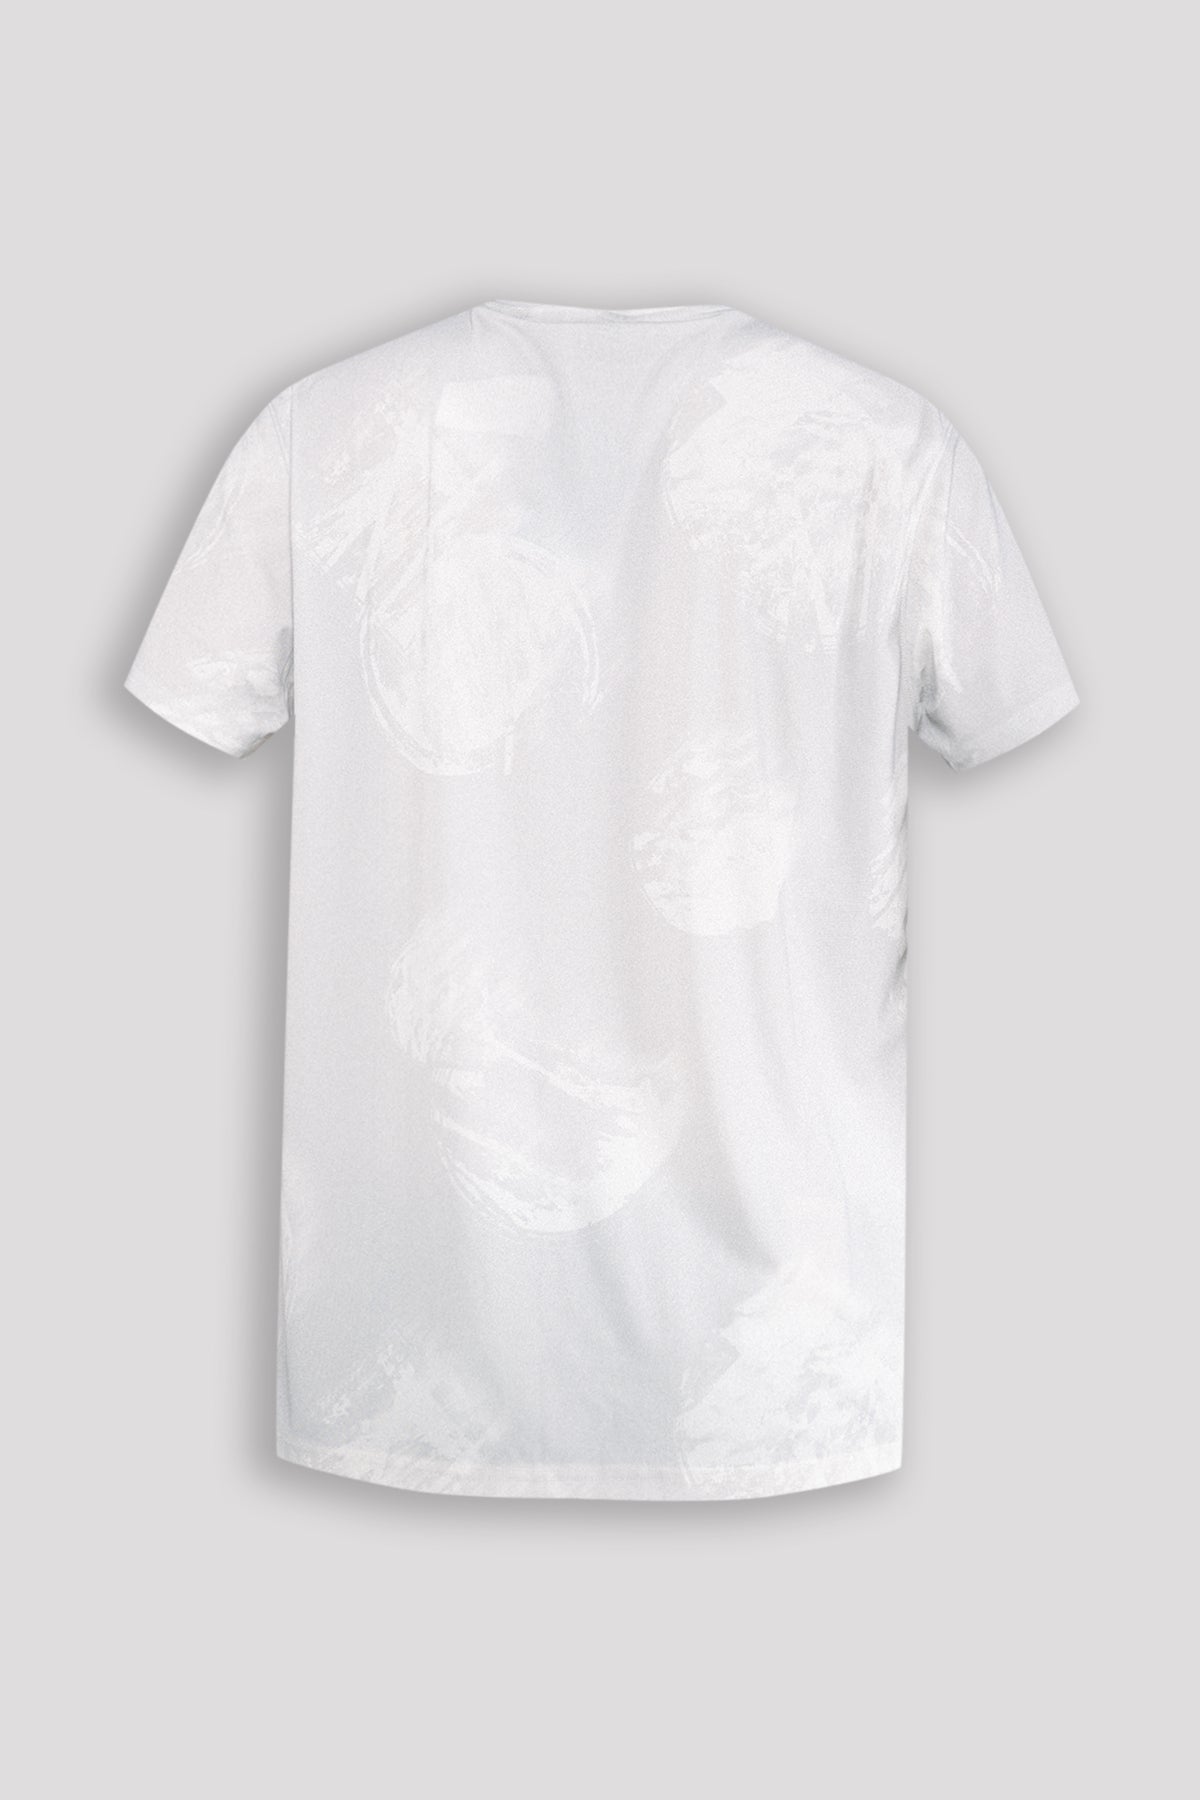 "Solace" Graphic Tee